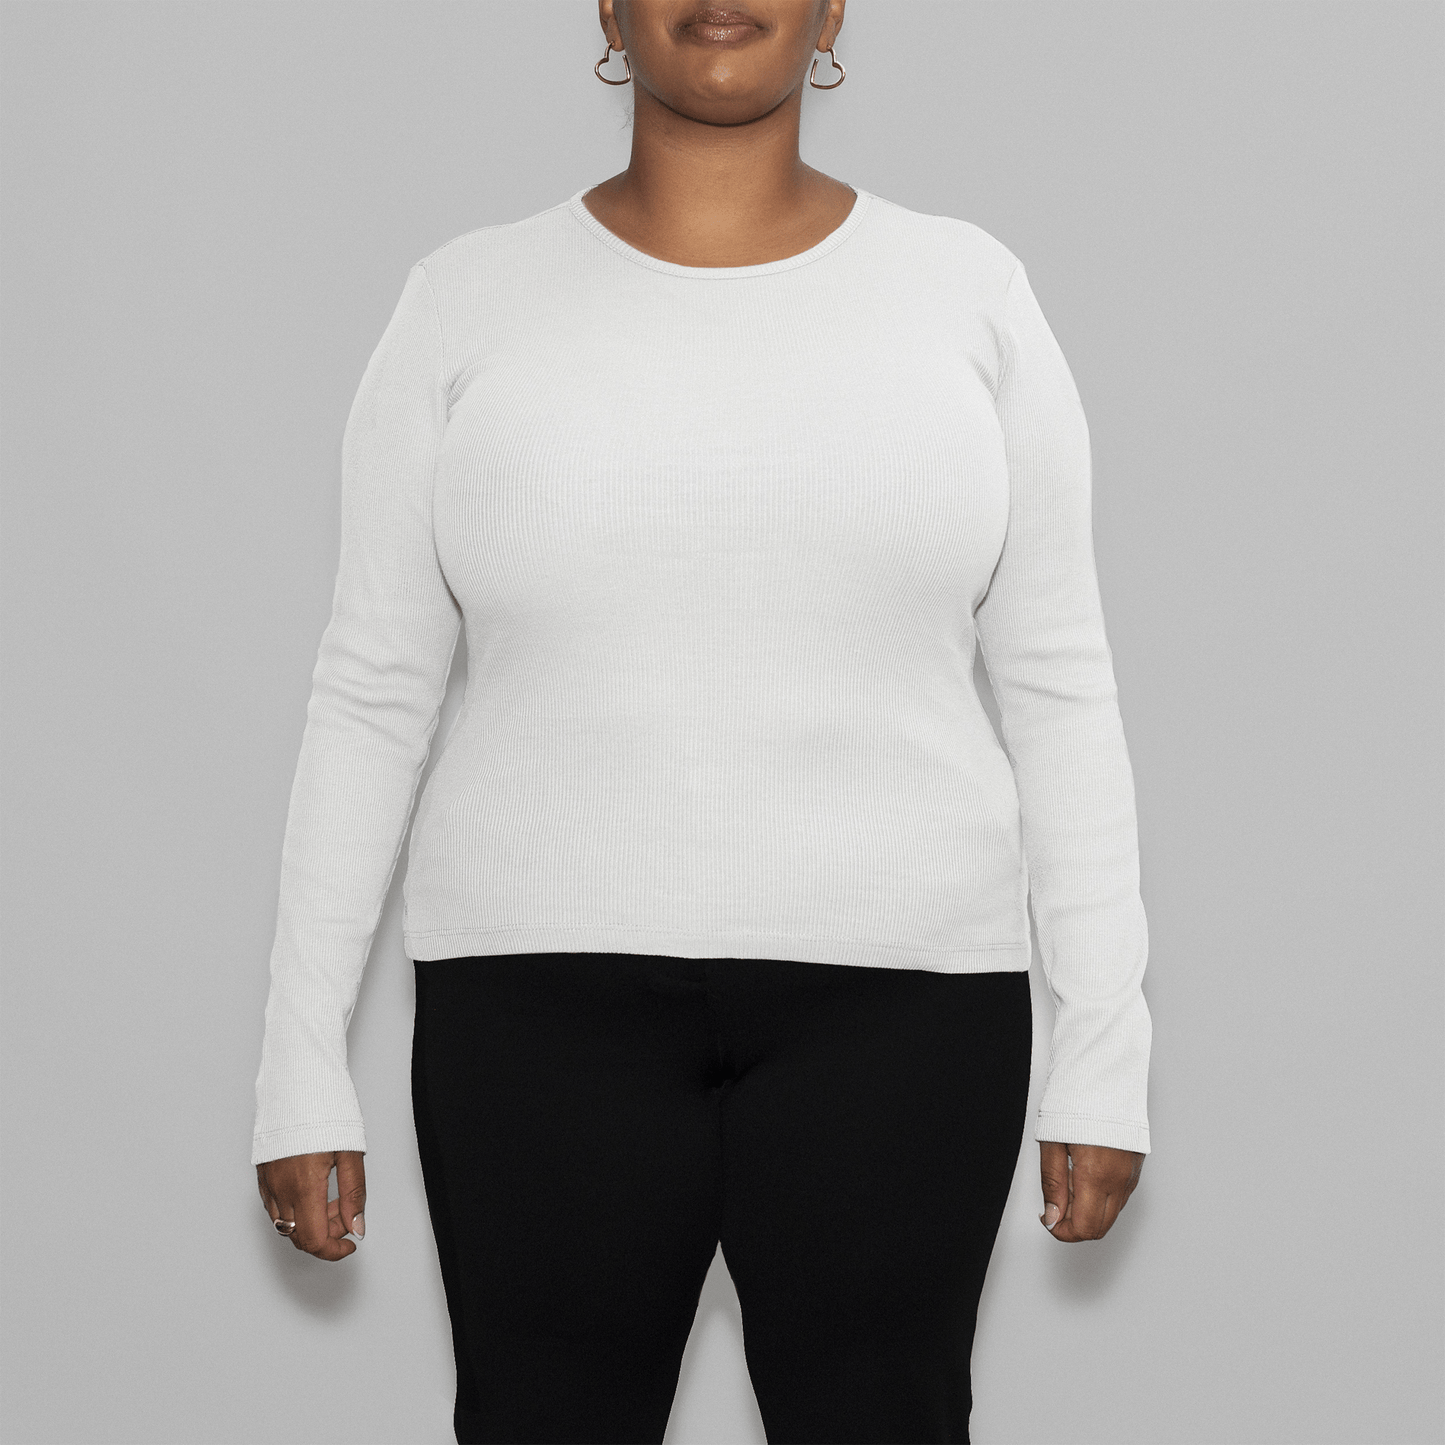 5 Pack | Women’s Rib Long Sleeve Tops, Recycled Cotton, White